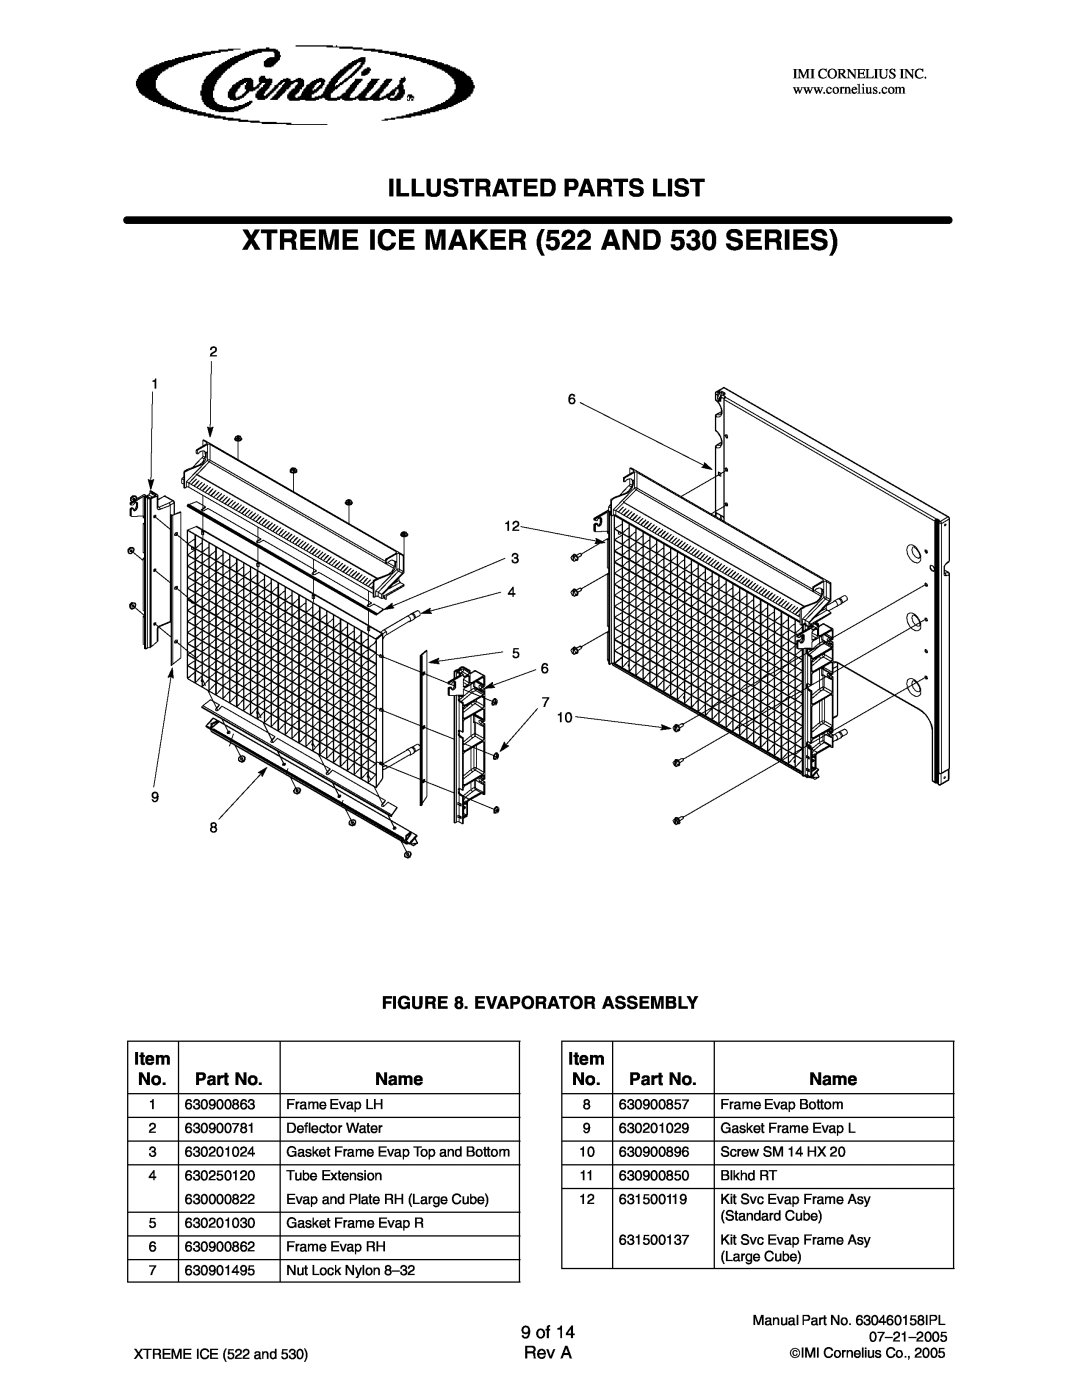 Cornelius 631805003 Evaporator Assembly, 9 of, XTREME ICE MAKER 522 AND 530 SERIES, Illustrated Parts List, Name, Rev A 